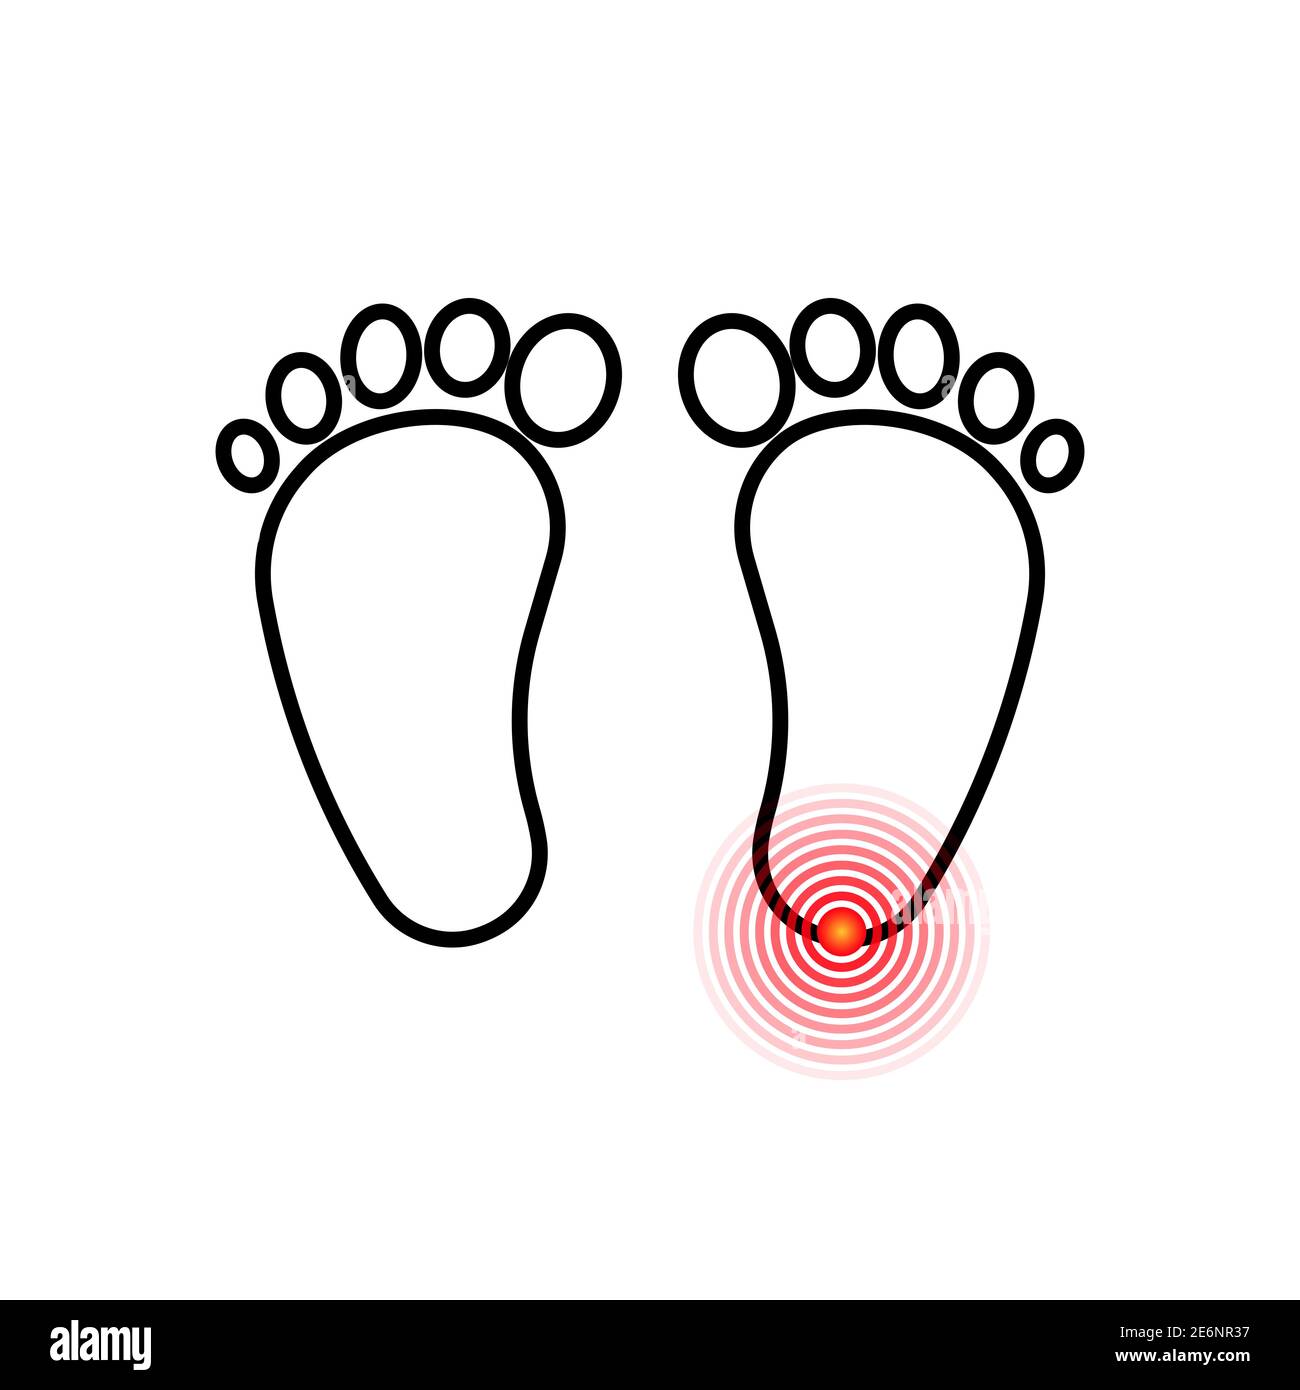 Foot pain icon. For biomechanics, footwear, shoe concepts, medical, health, massage, spa, acupuncture centers etc. Pain concept. Isolated on white bac Stock Vector